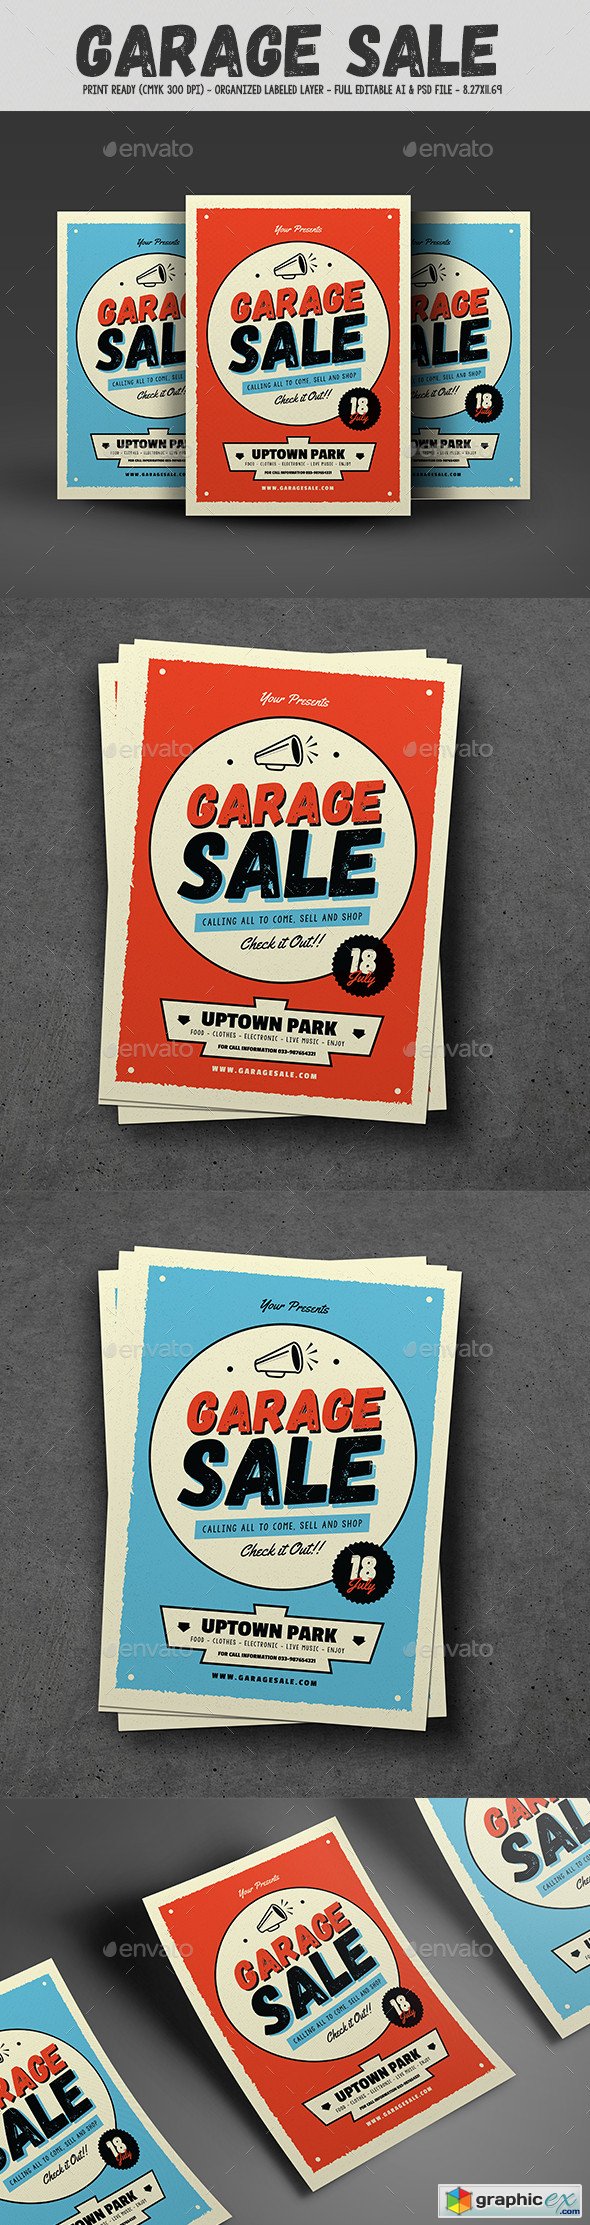 Garage Sale Flyer by Guuver 16683065